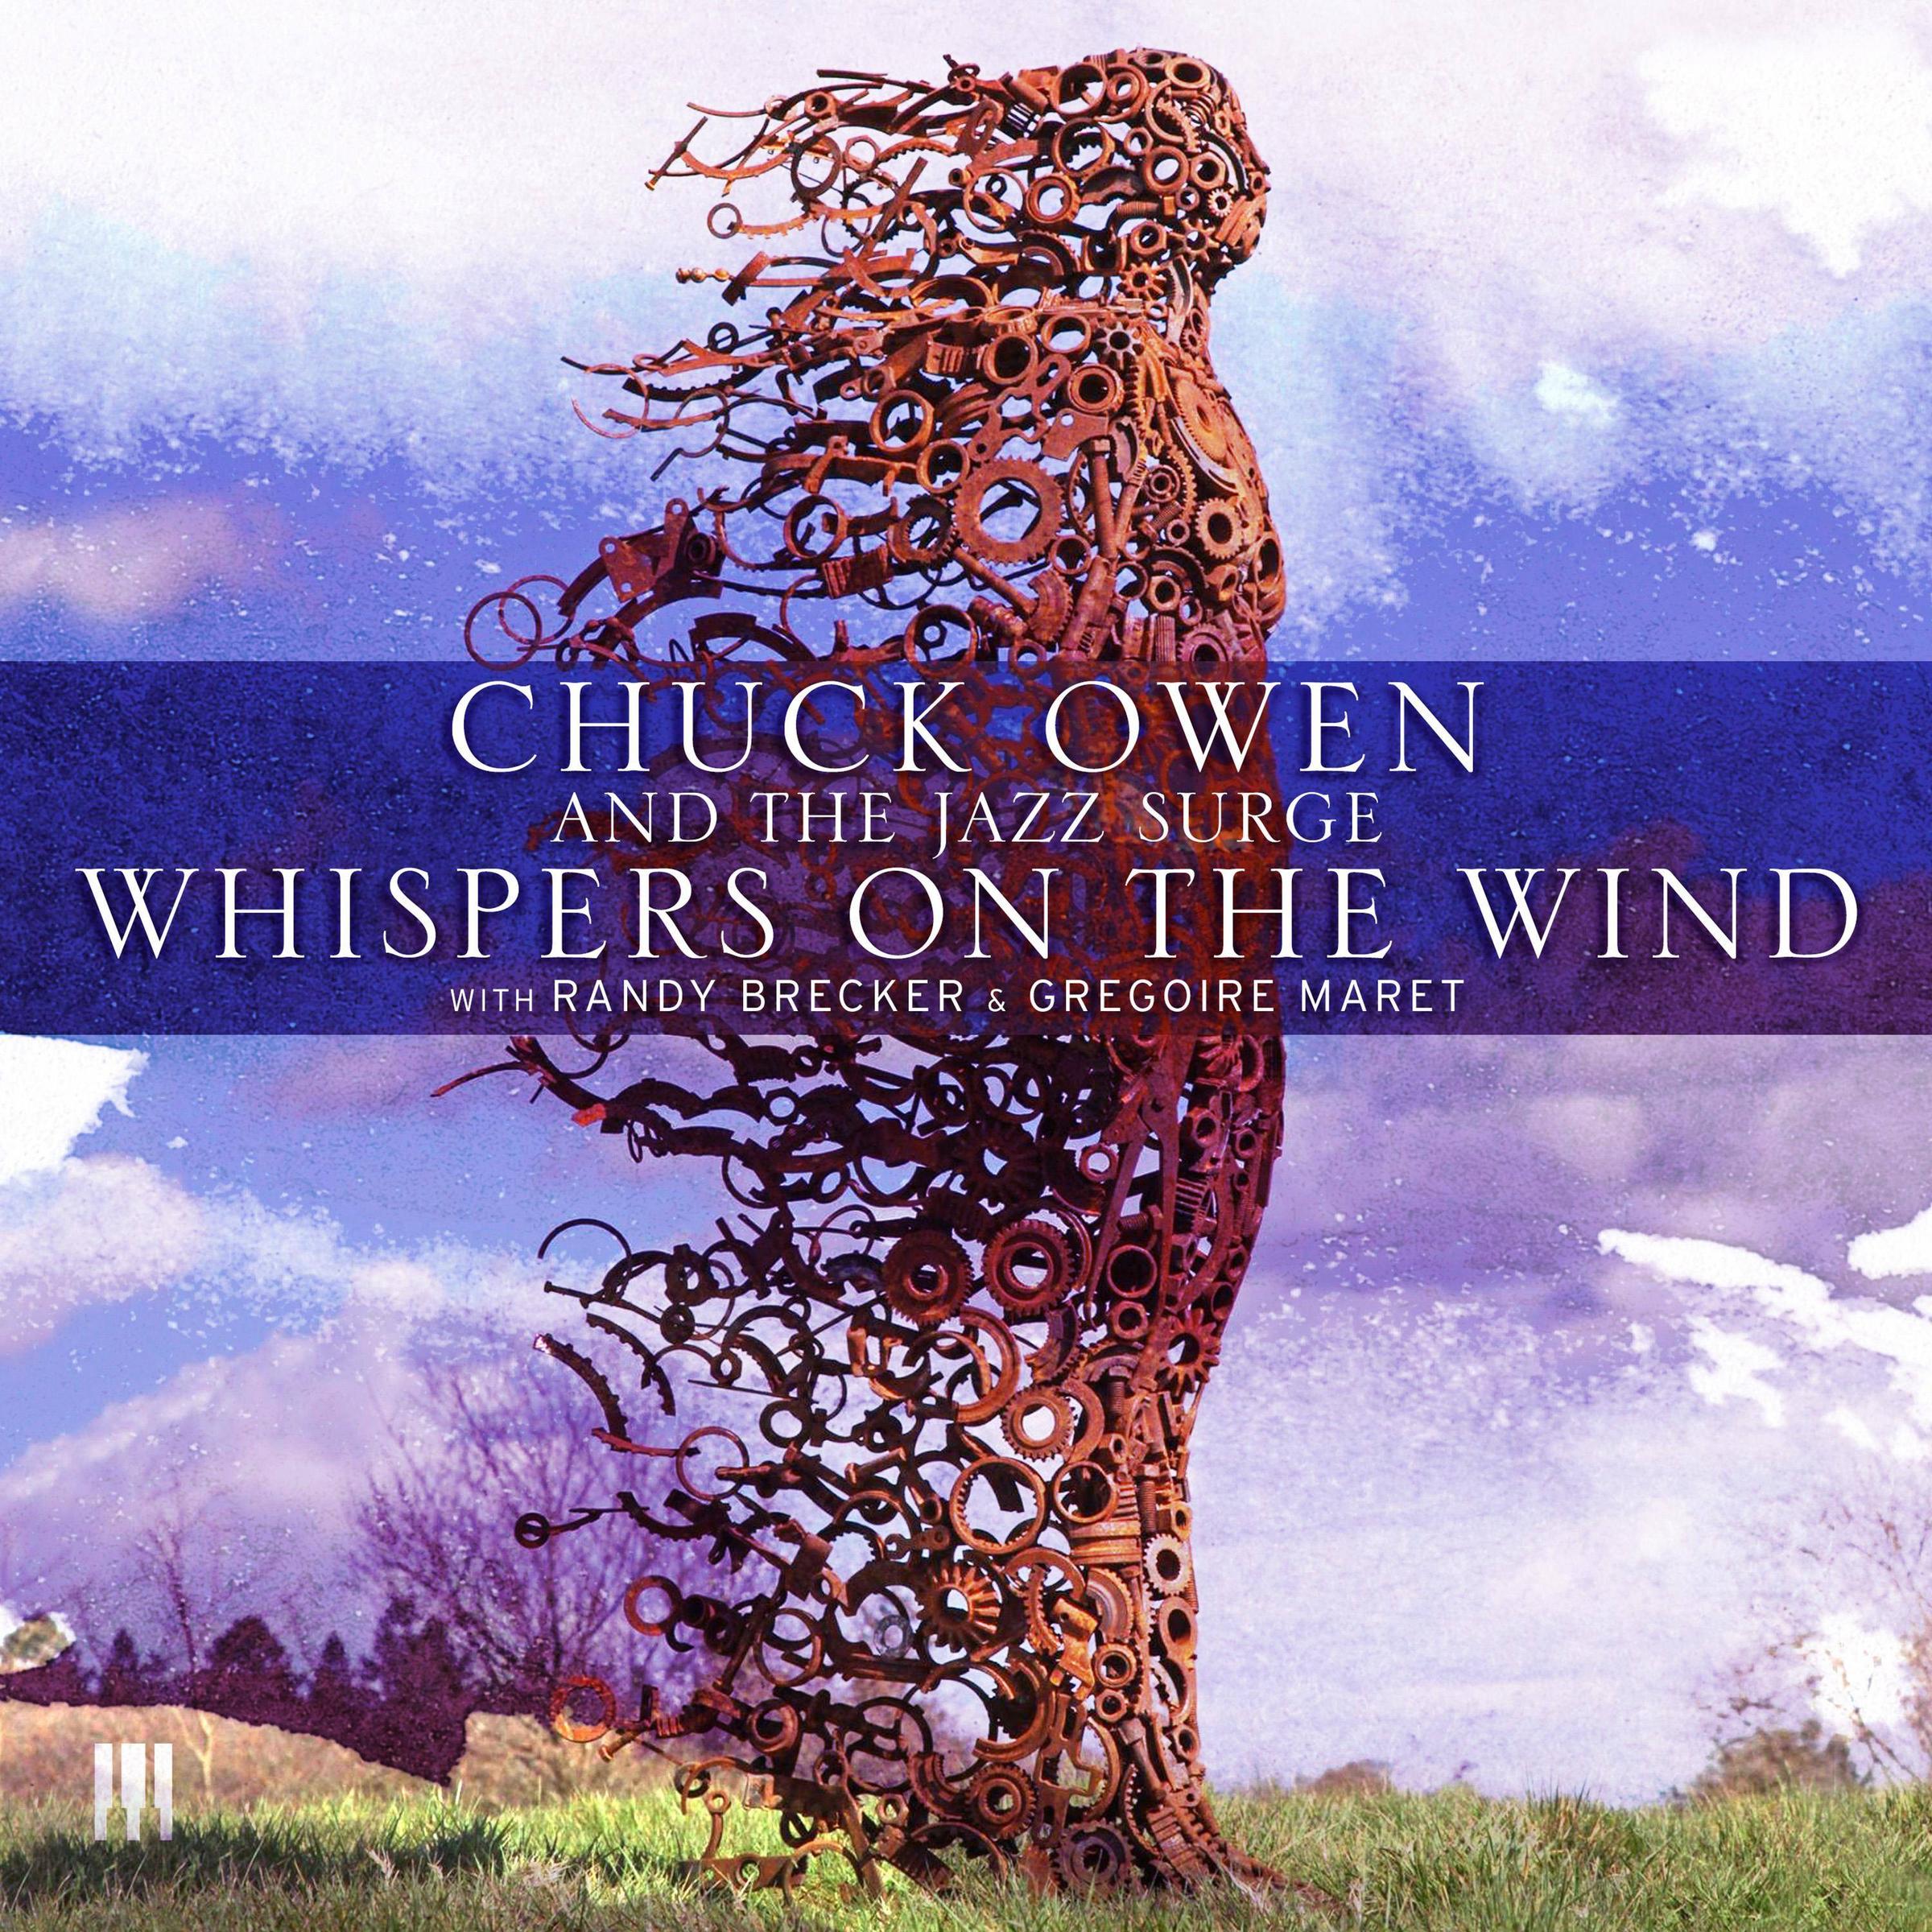 Chuck Owen and The Jazz Surge - Whispers On The Wind (2017) [HDTracks FLAC 24bit/96kHz]